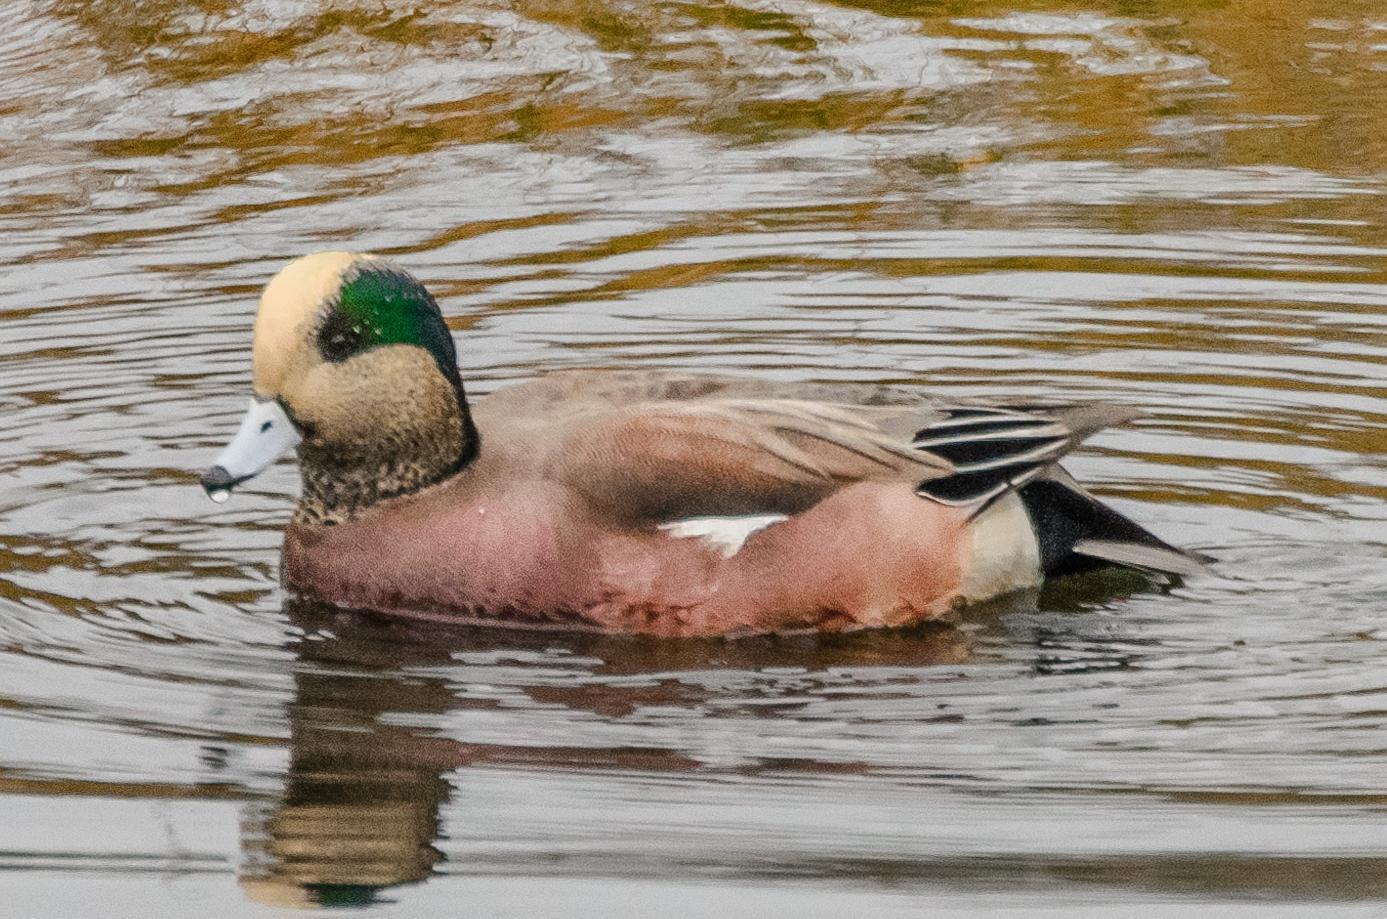 American Wigeon Photo by Scott Yerges